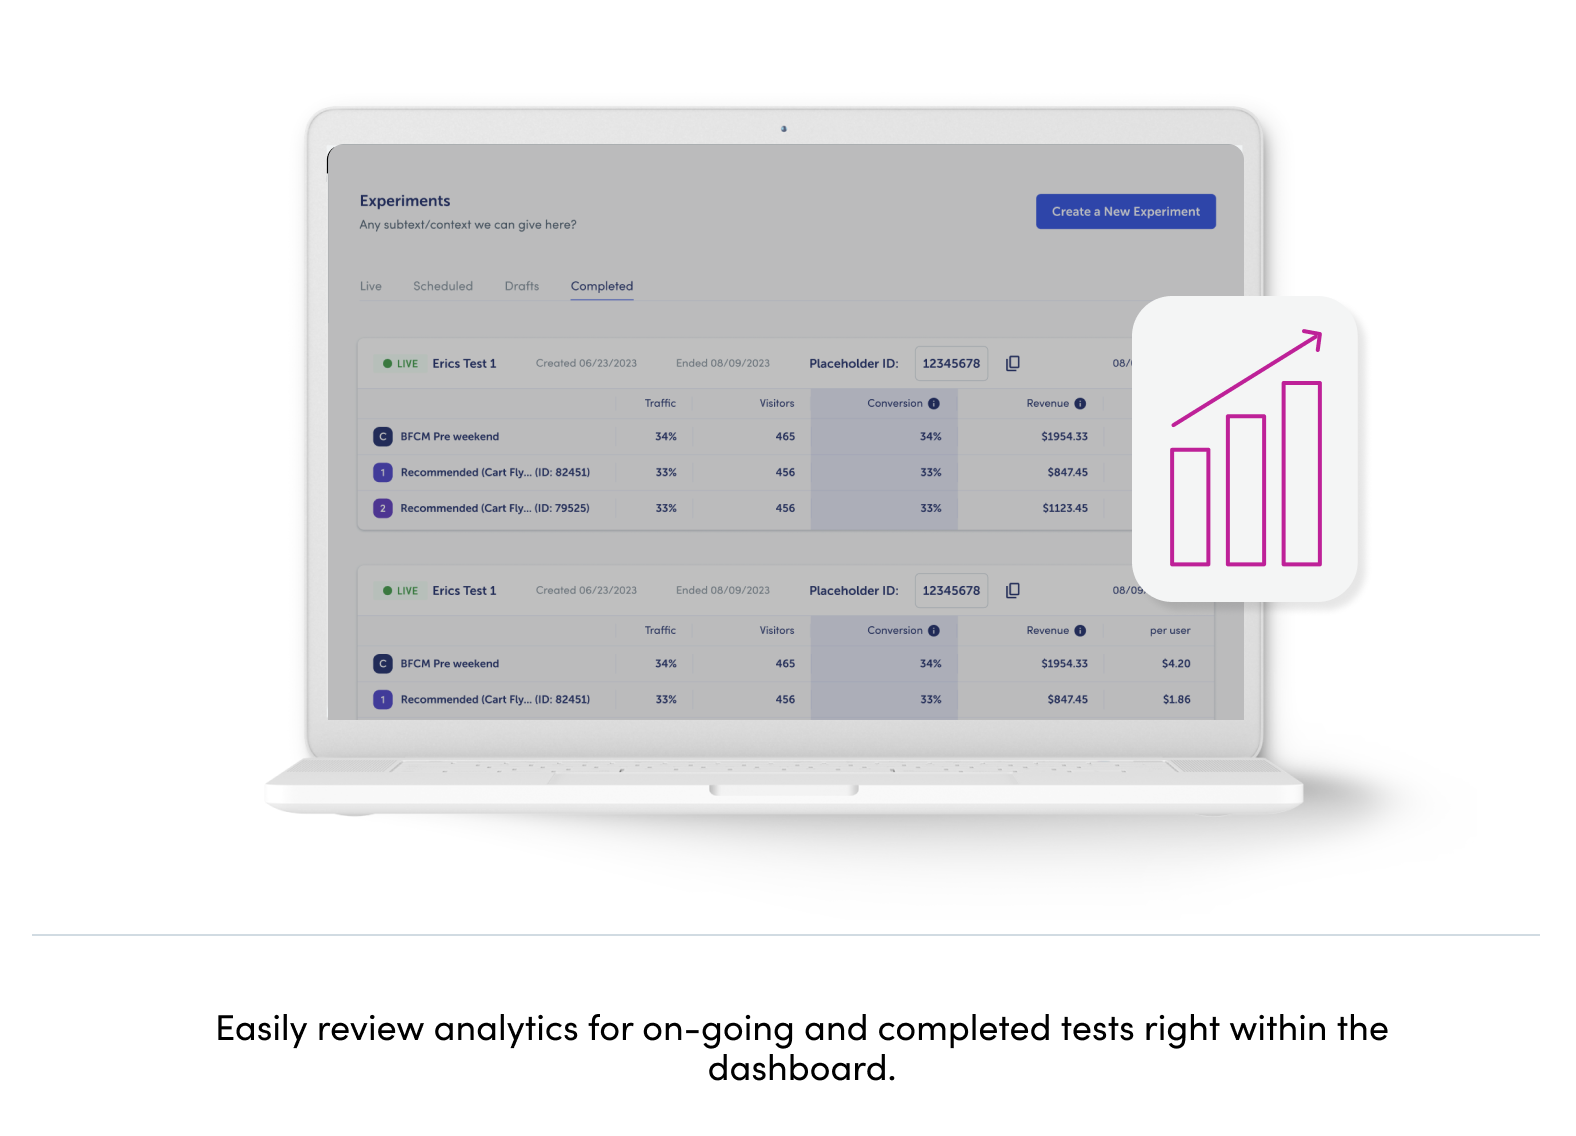 Easily review analytics for on-going and completed tests right within the dashboard.